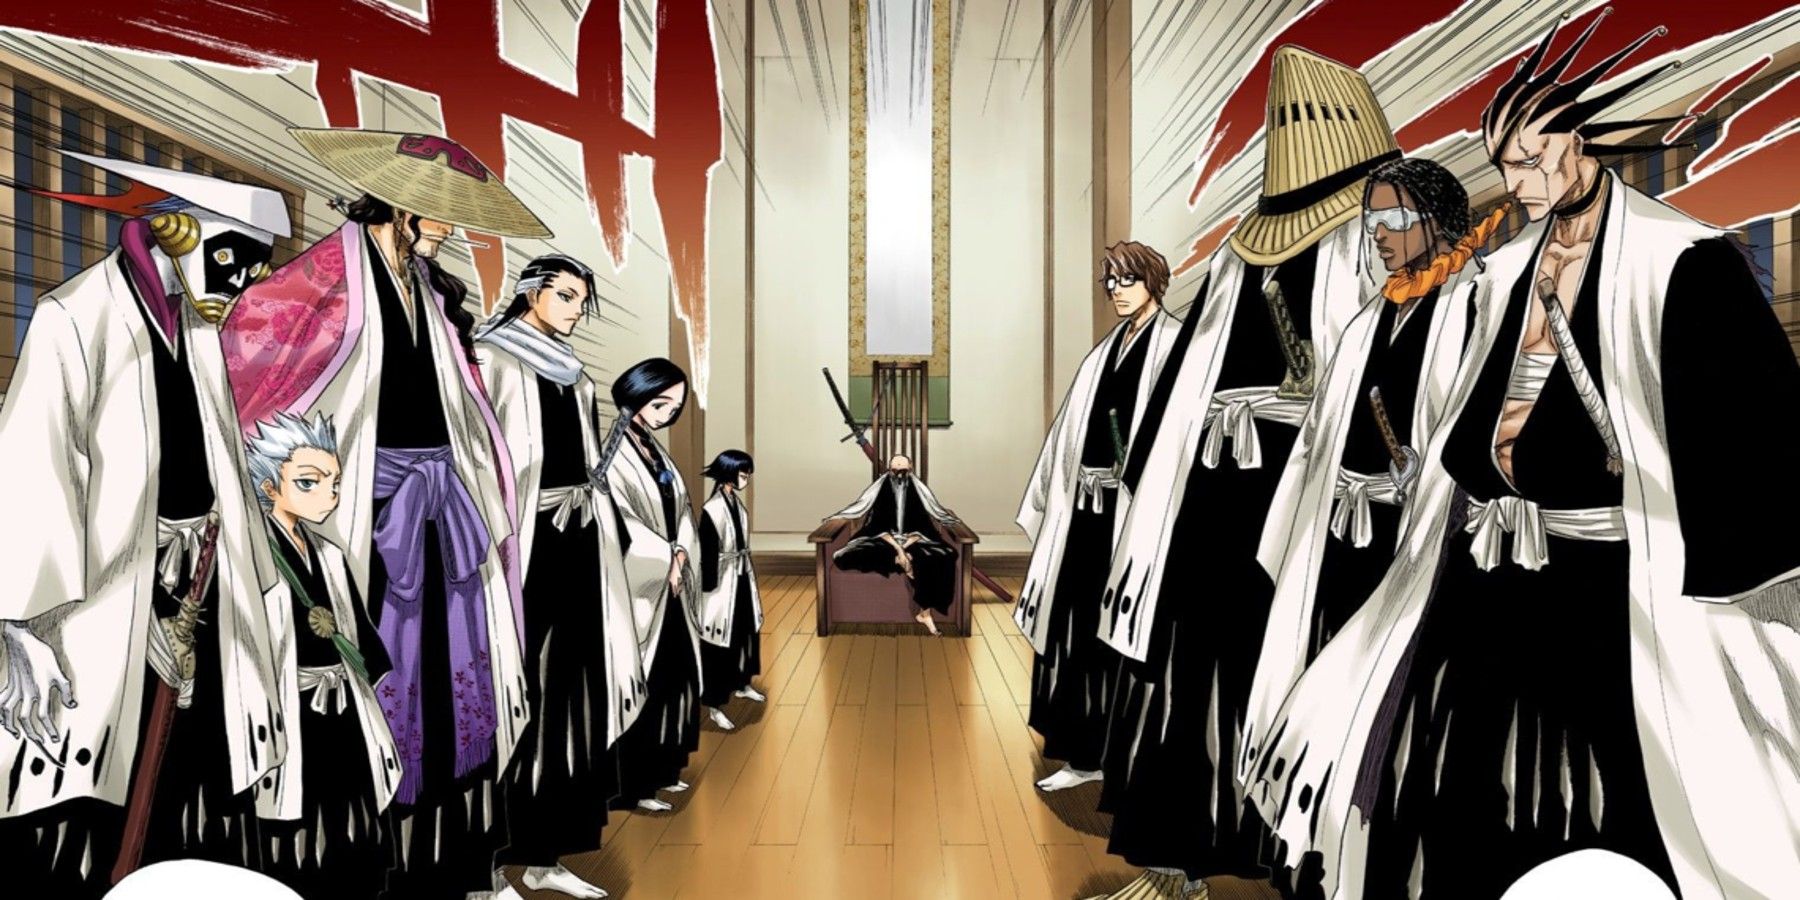 Bleach TYBW Who are the current Gotei 13 captains